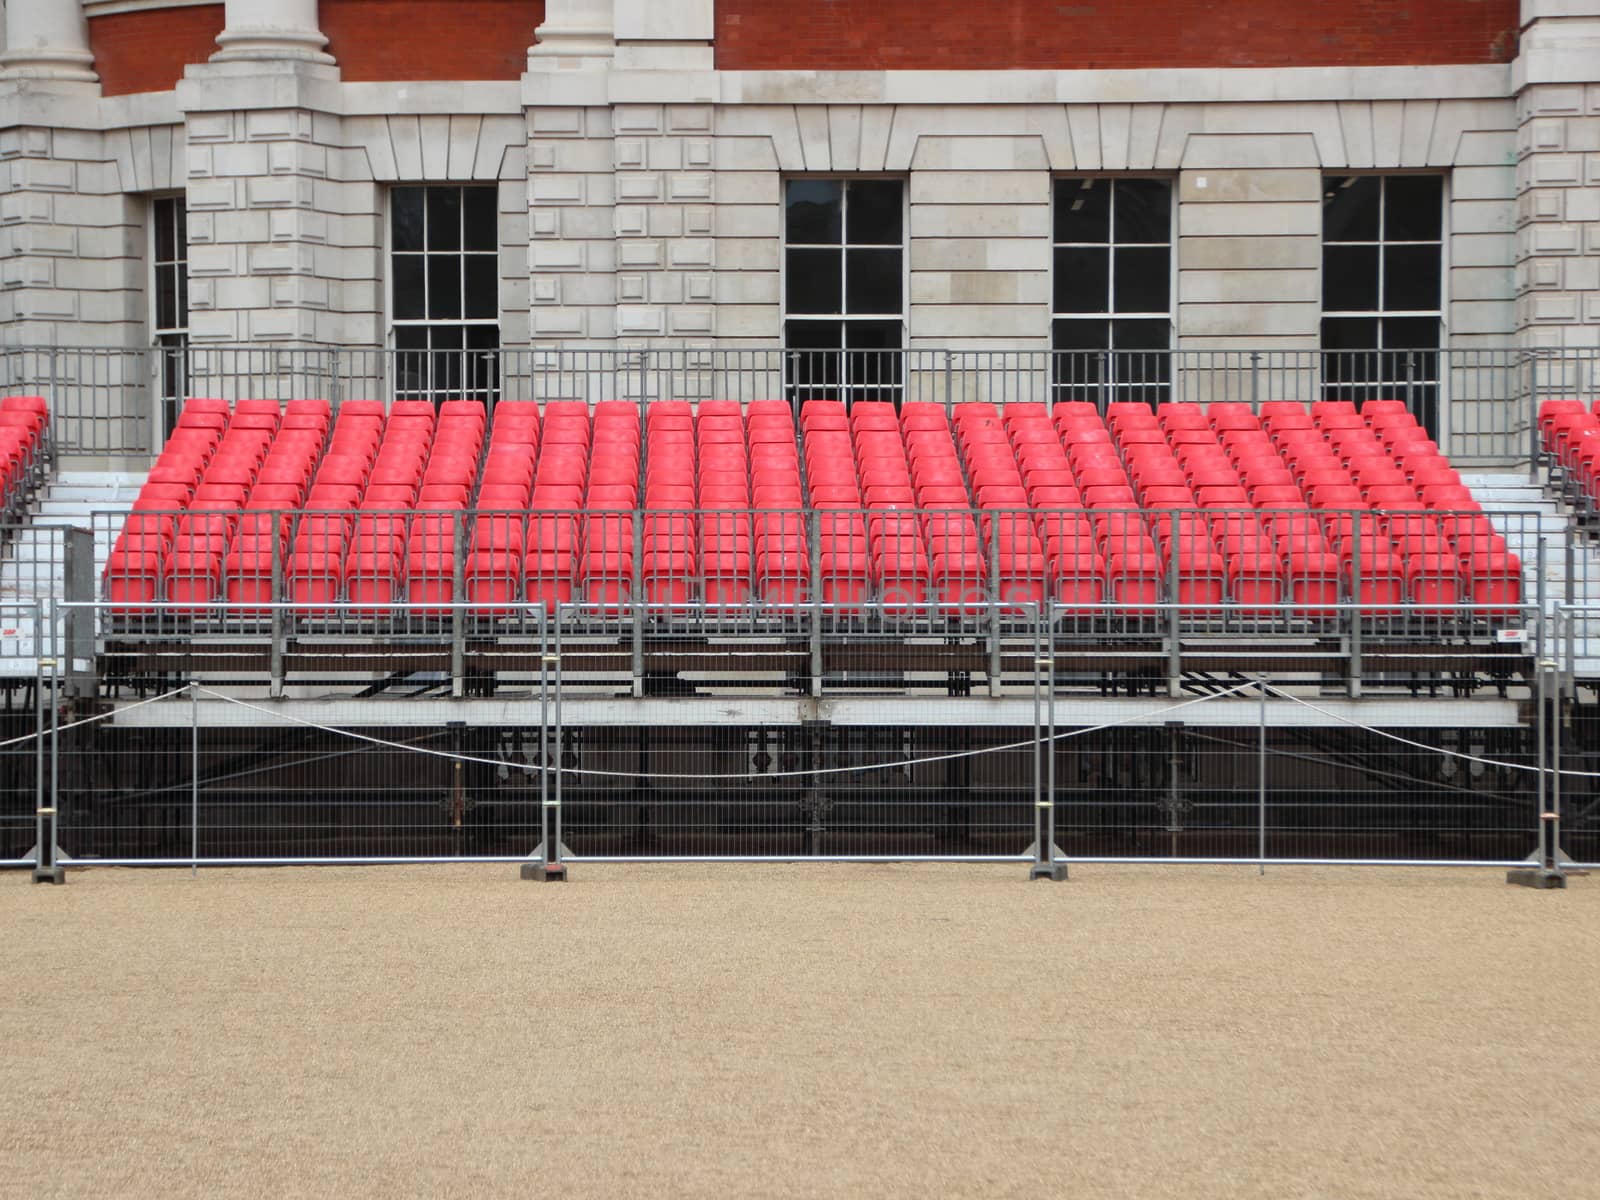 Section af Stand Platform with Rows of Red Plastic Seats on Gravel Square